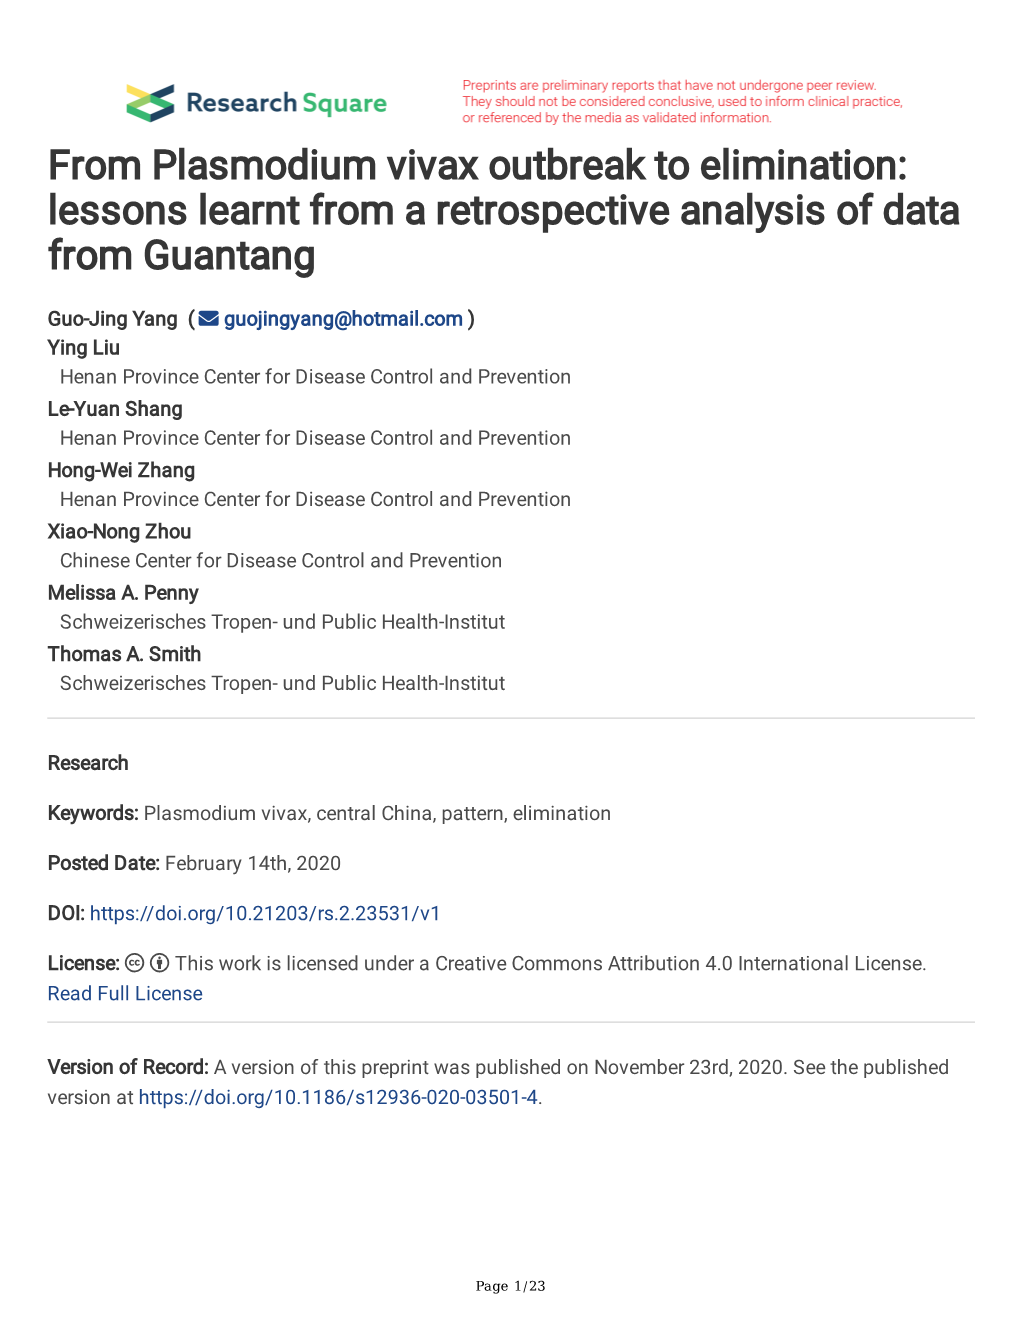 From Plasmodium Vivax Outbreak to Elimination: Lessons Learnt from a Retrospective Analysis of Data from Guantang